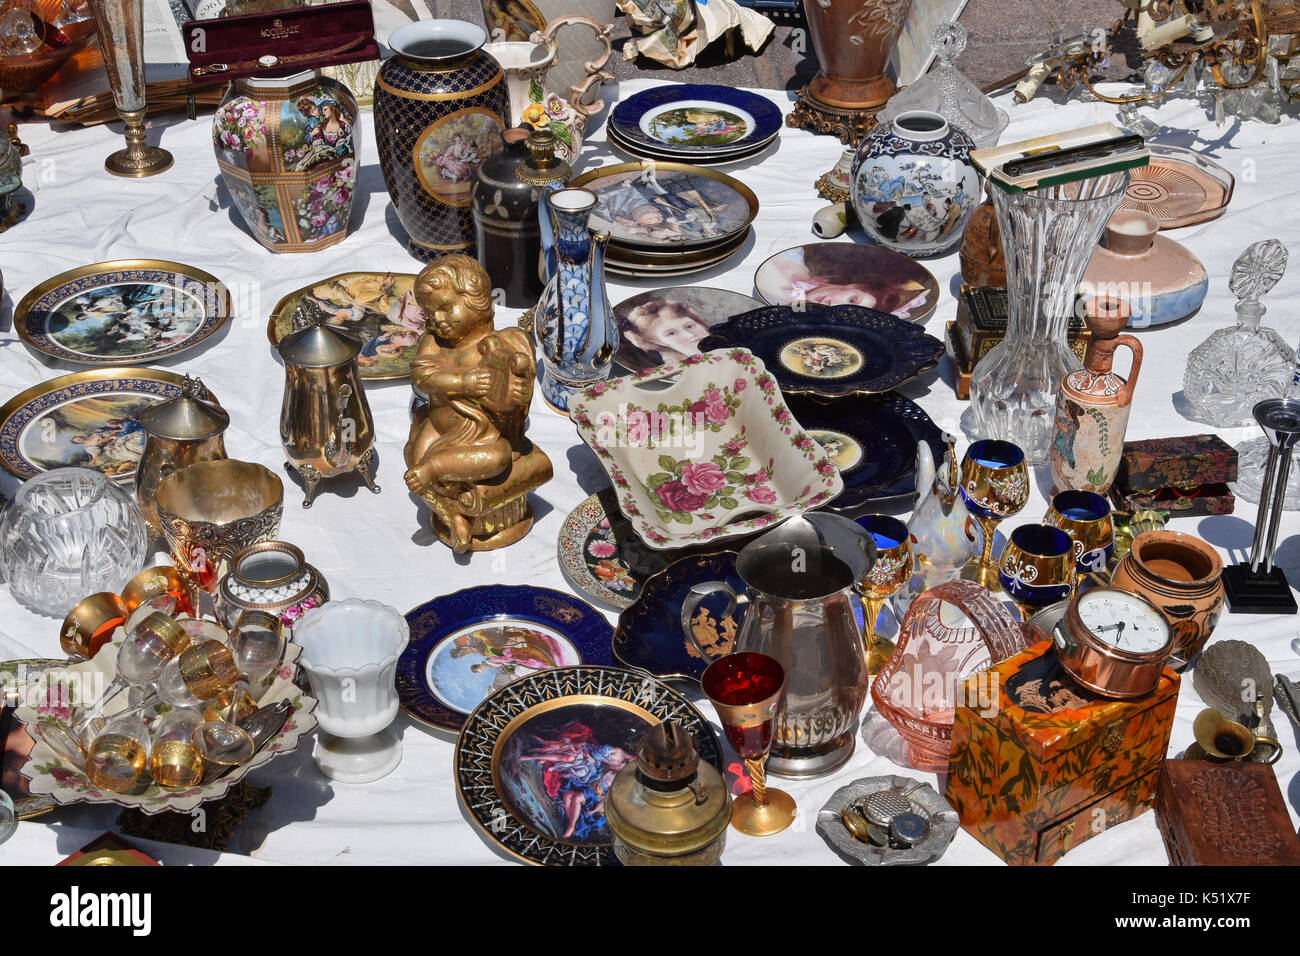 ATHENS, GREECE - MAY 31, 2015: Vintage glass decorative objects antique porcelain plates and vases for sale at flea market. Stock Photo